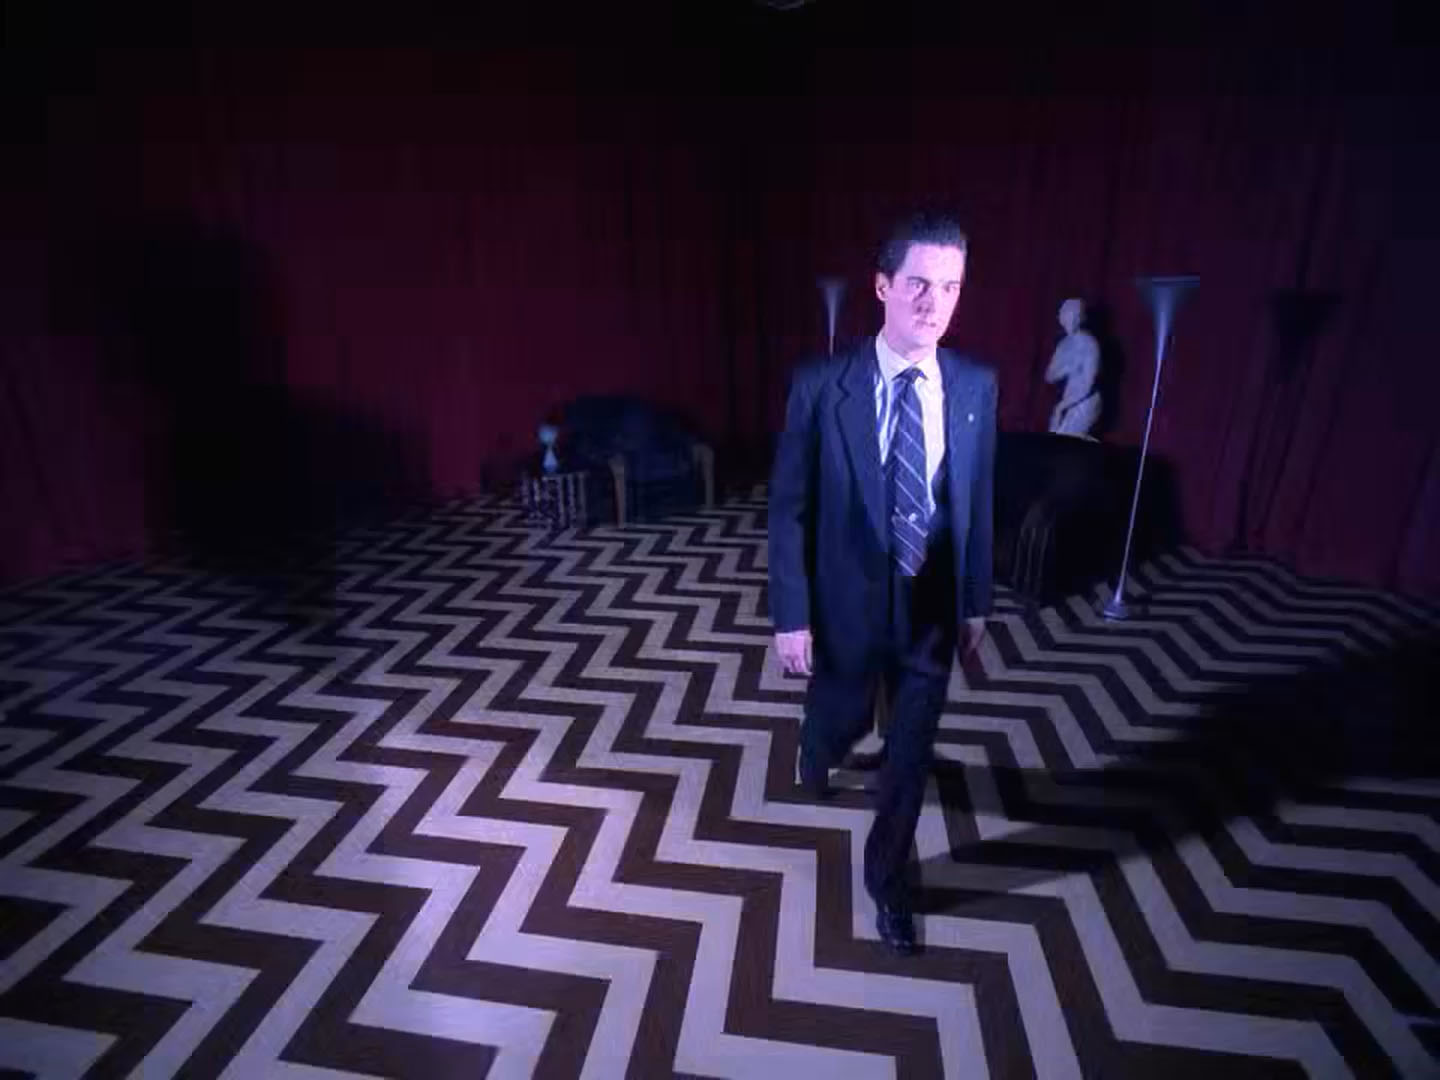 Agent Dale Cooper walking through the Red Room